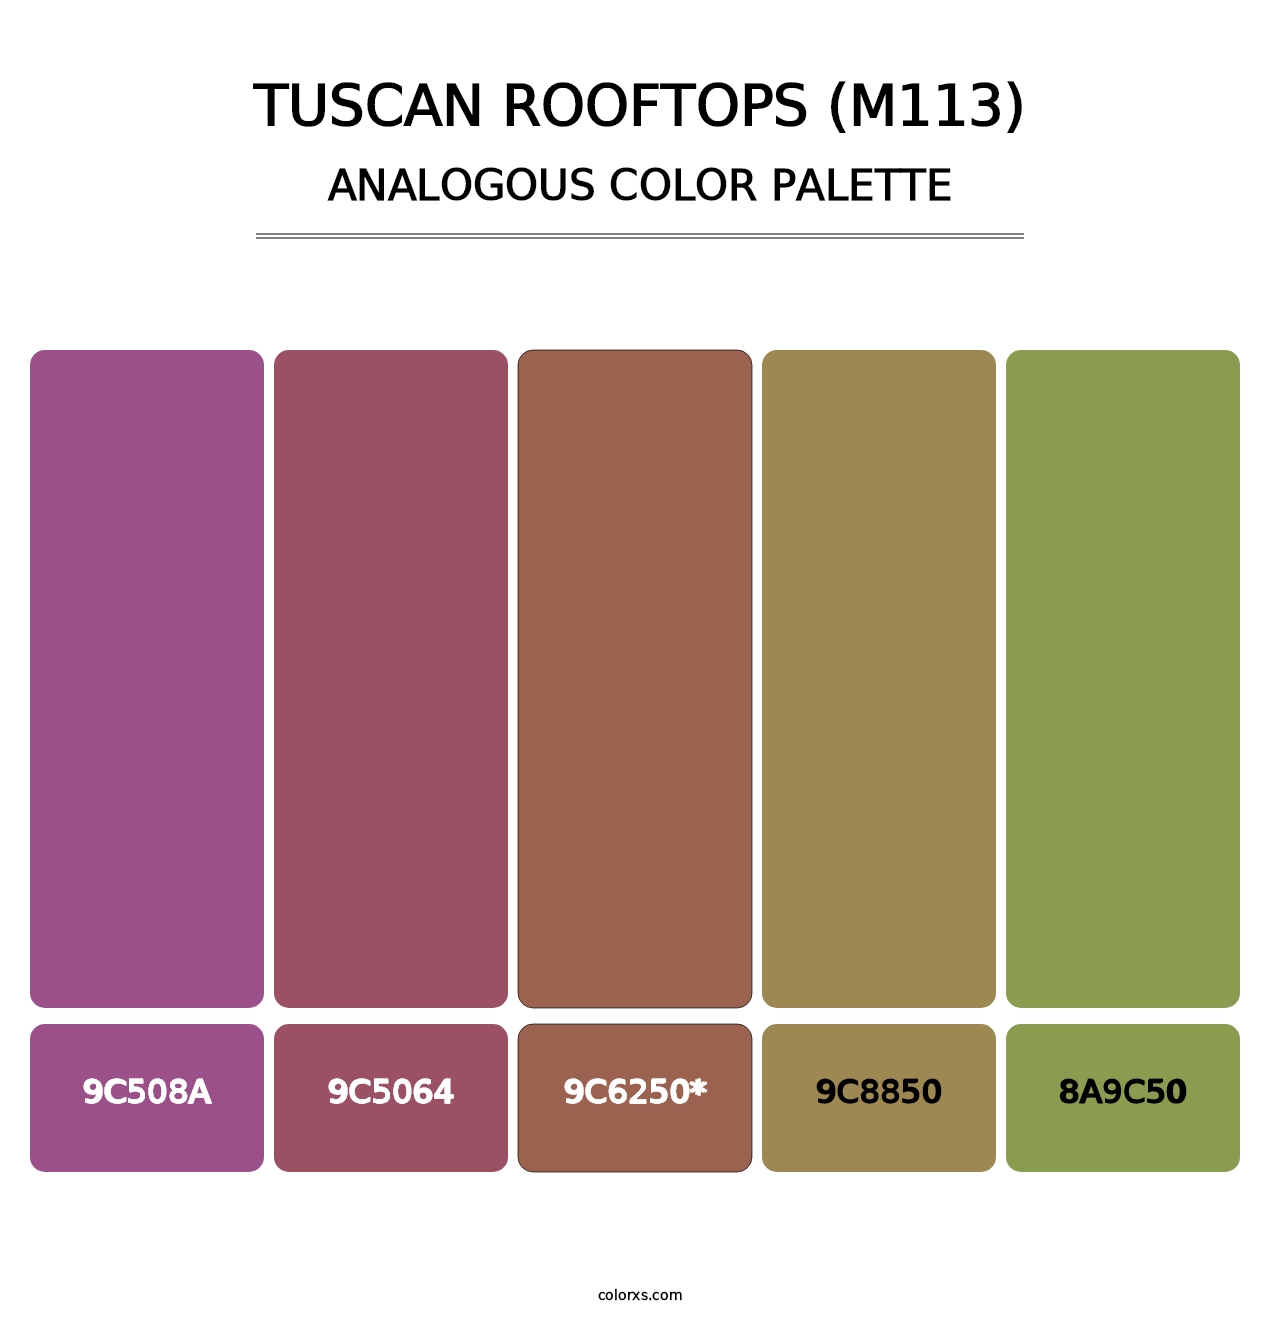 Tuscan Rooftops (M113) - Analogous Color Palette